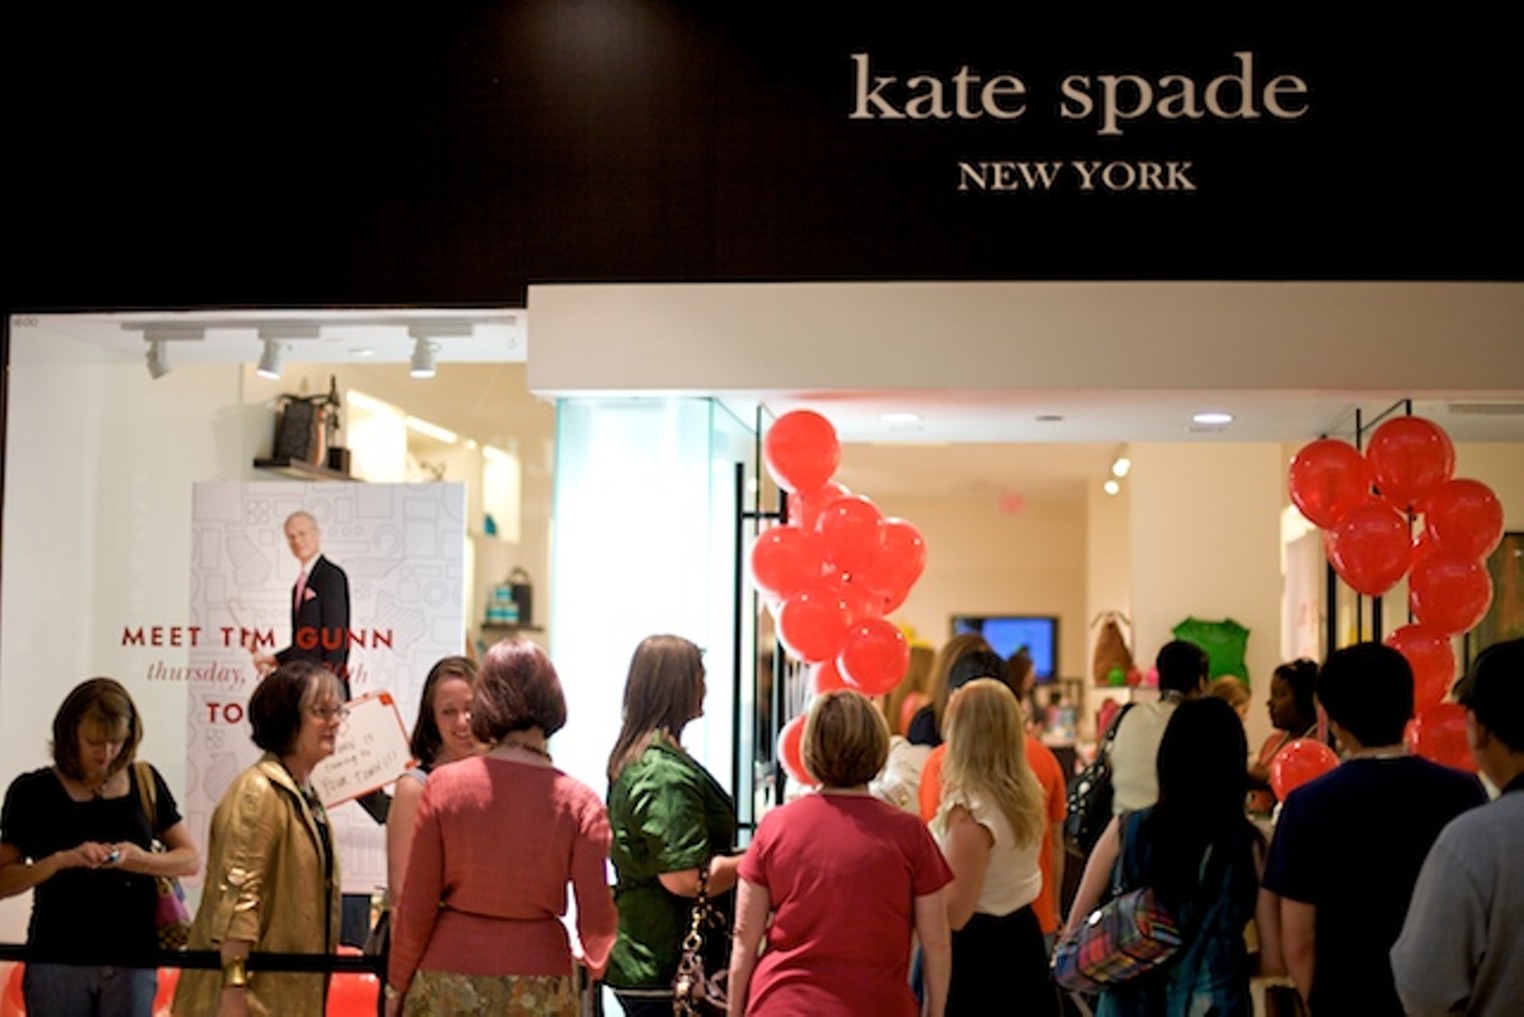 Designer Tim Gunn Visits Kate Spade at the Galleria | Dallas | Dallas  Observer | The Leading Independent News Source in Dallas, Texas